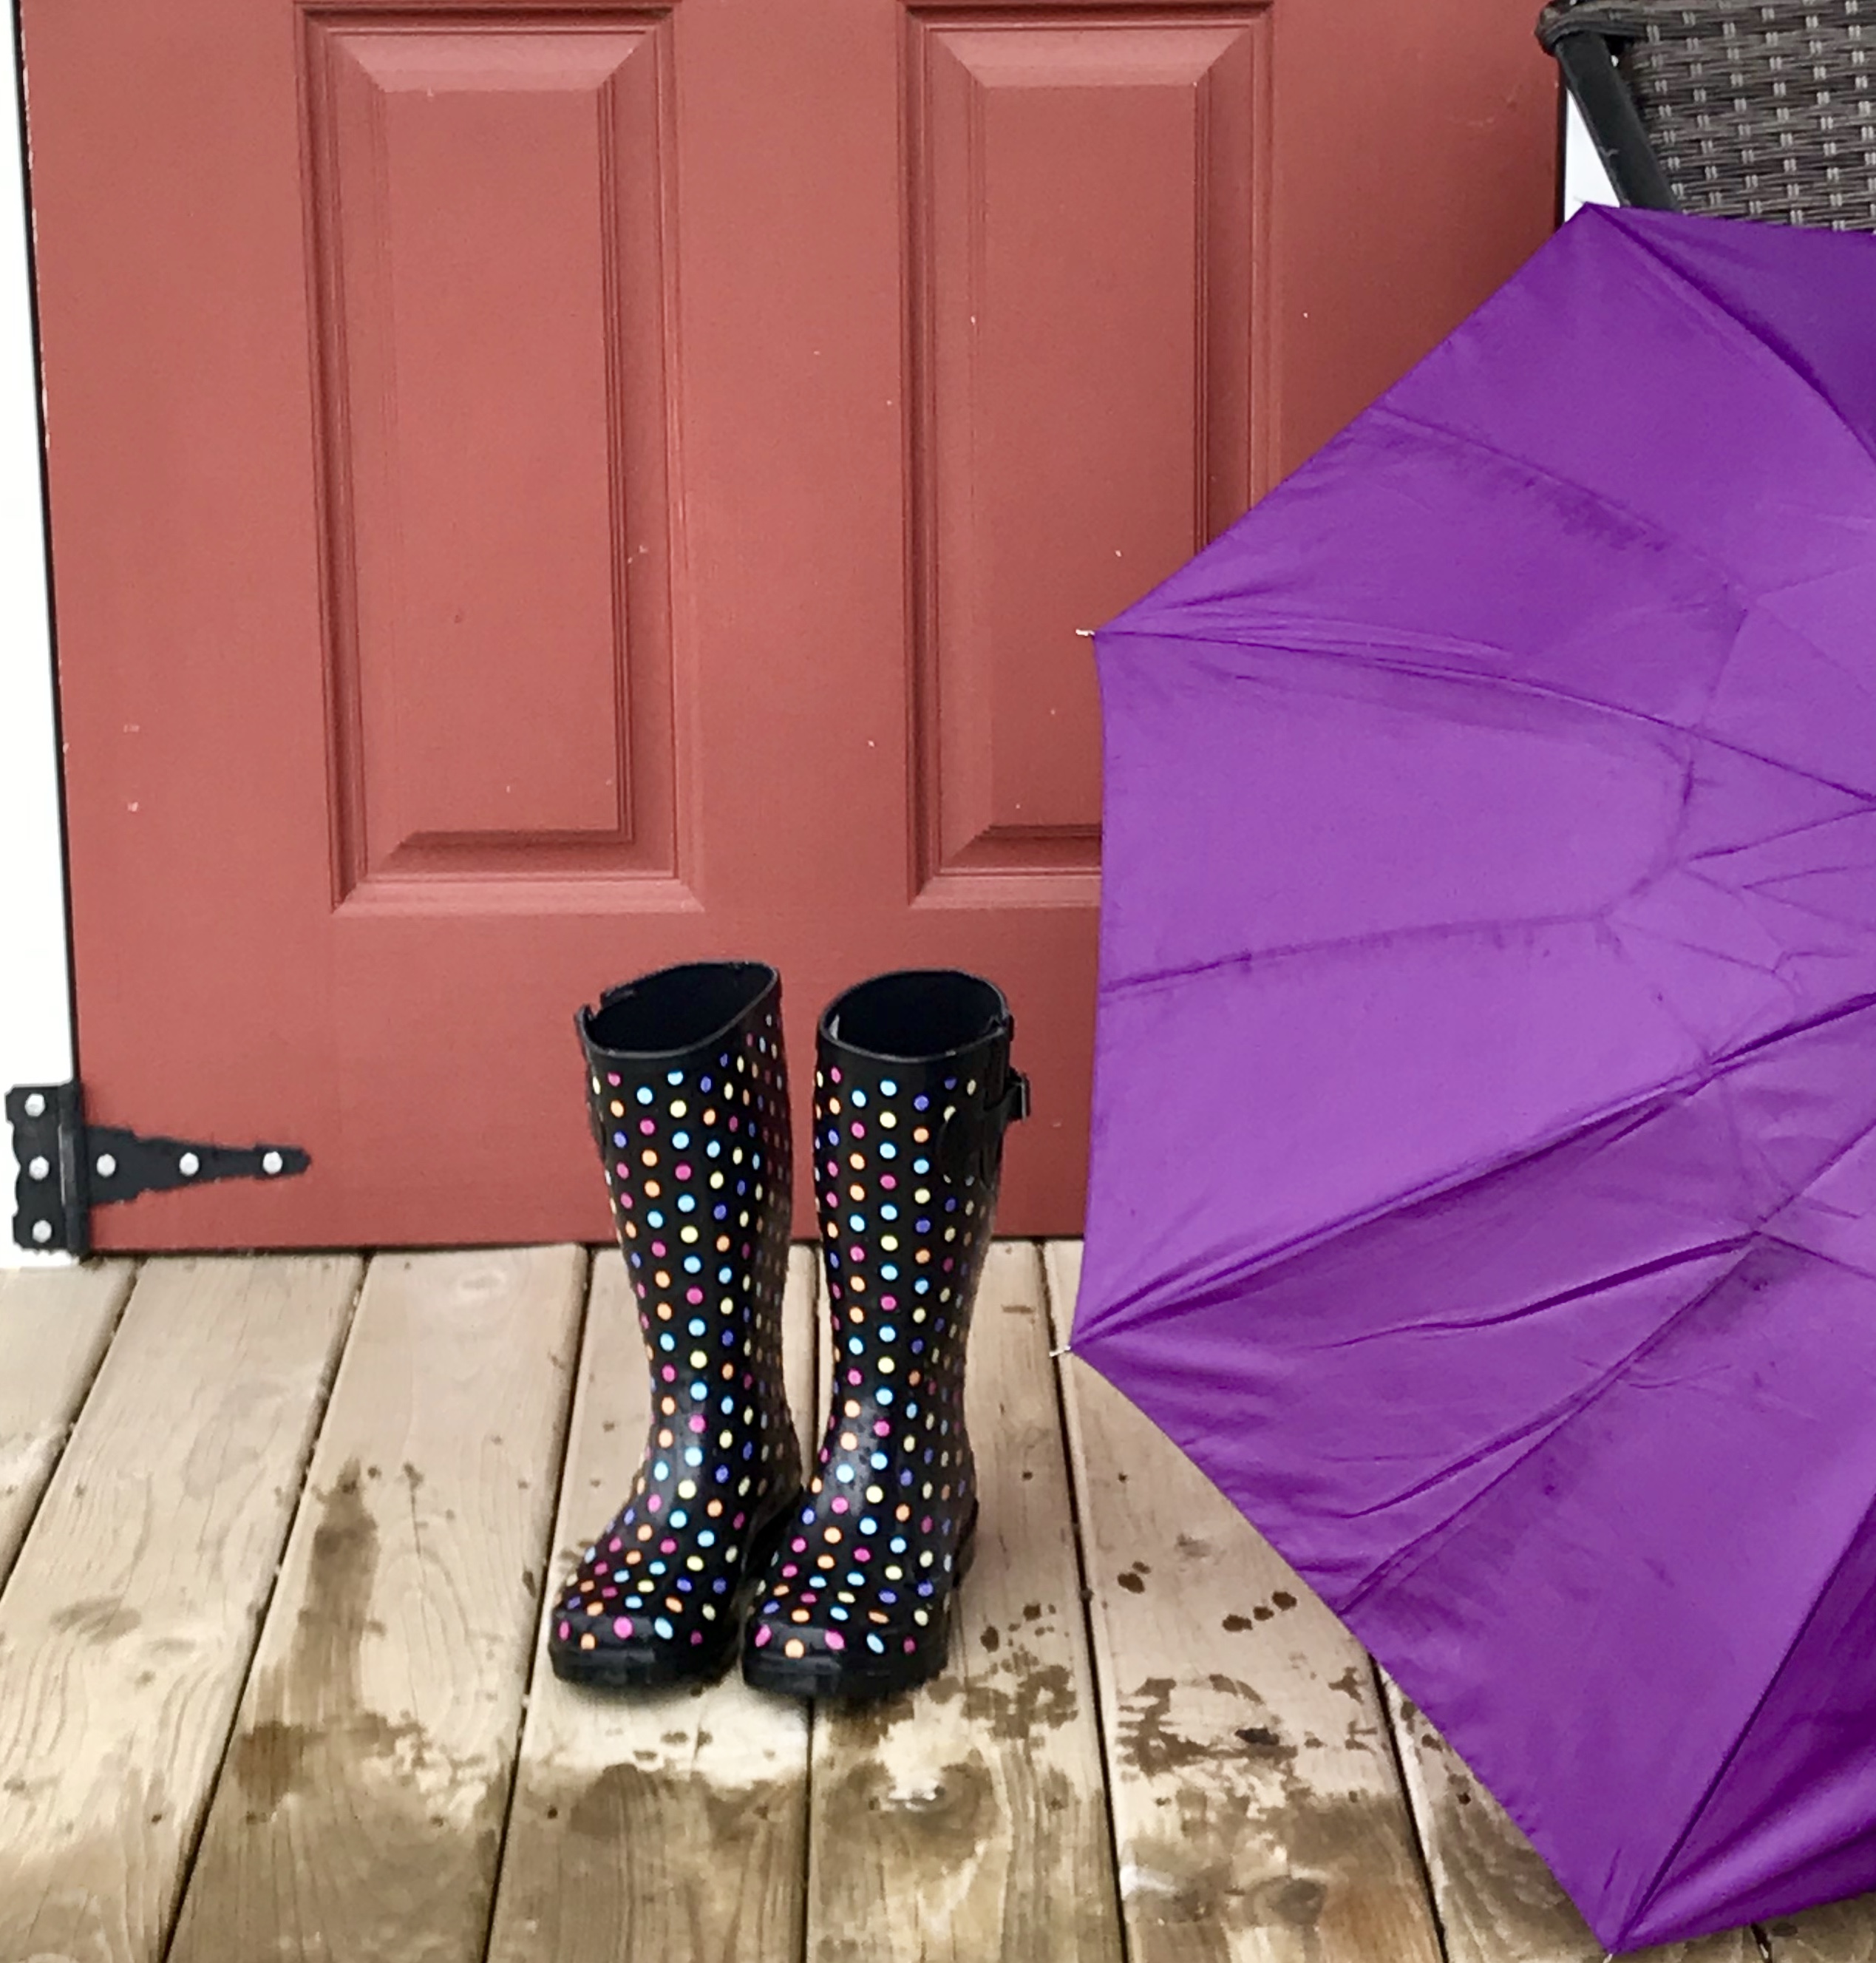 Get Your Rain Boots and Umbrella! It’s THAT Kind of Day